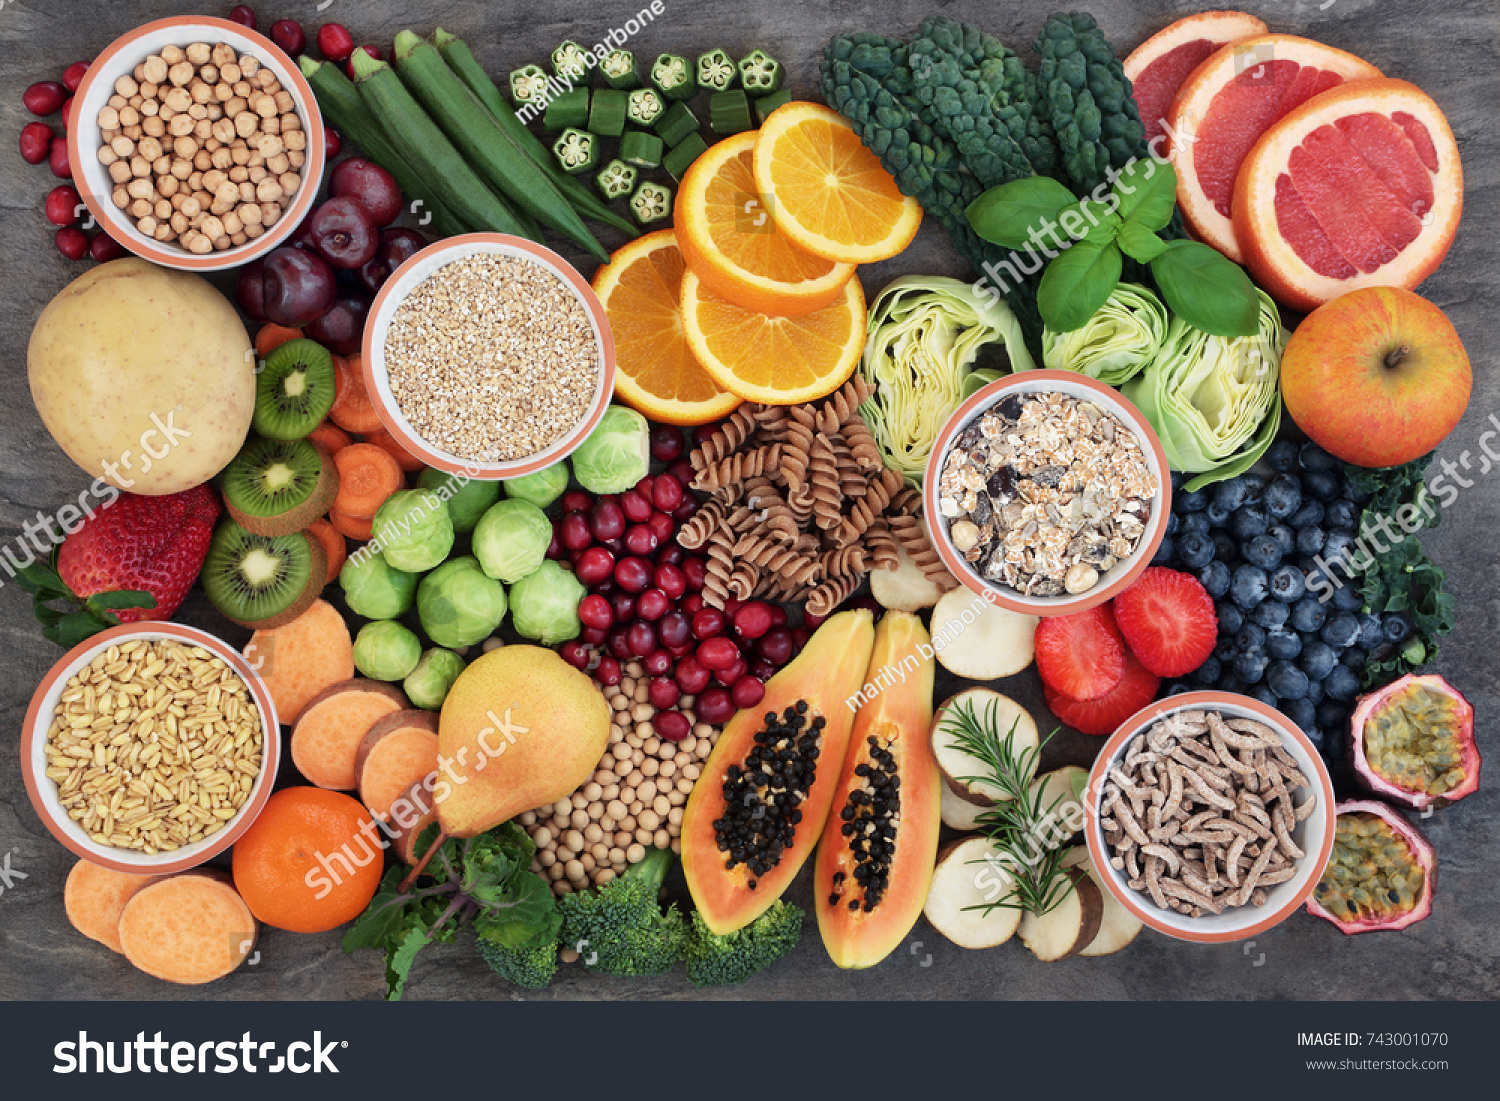 Vegan health food concept for  high fibre diet with fruit, vegetables, cereals, whole wheat pasta, grains, legumes, herbs. Foods high in antioxidants  and vitamins. Immune system boosting. Flat lay. #743001070